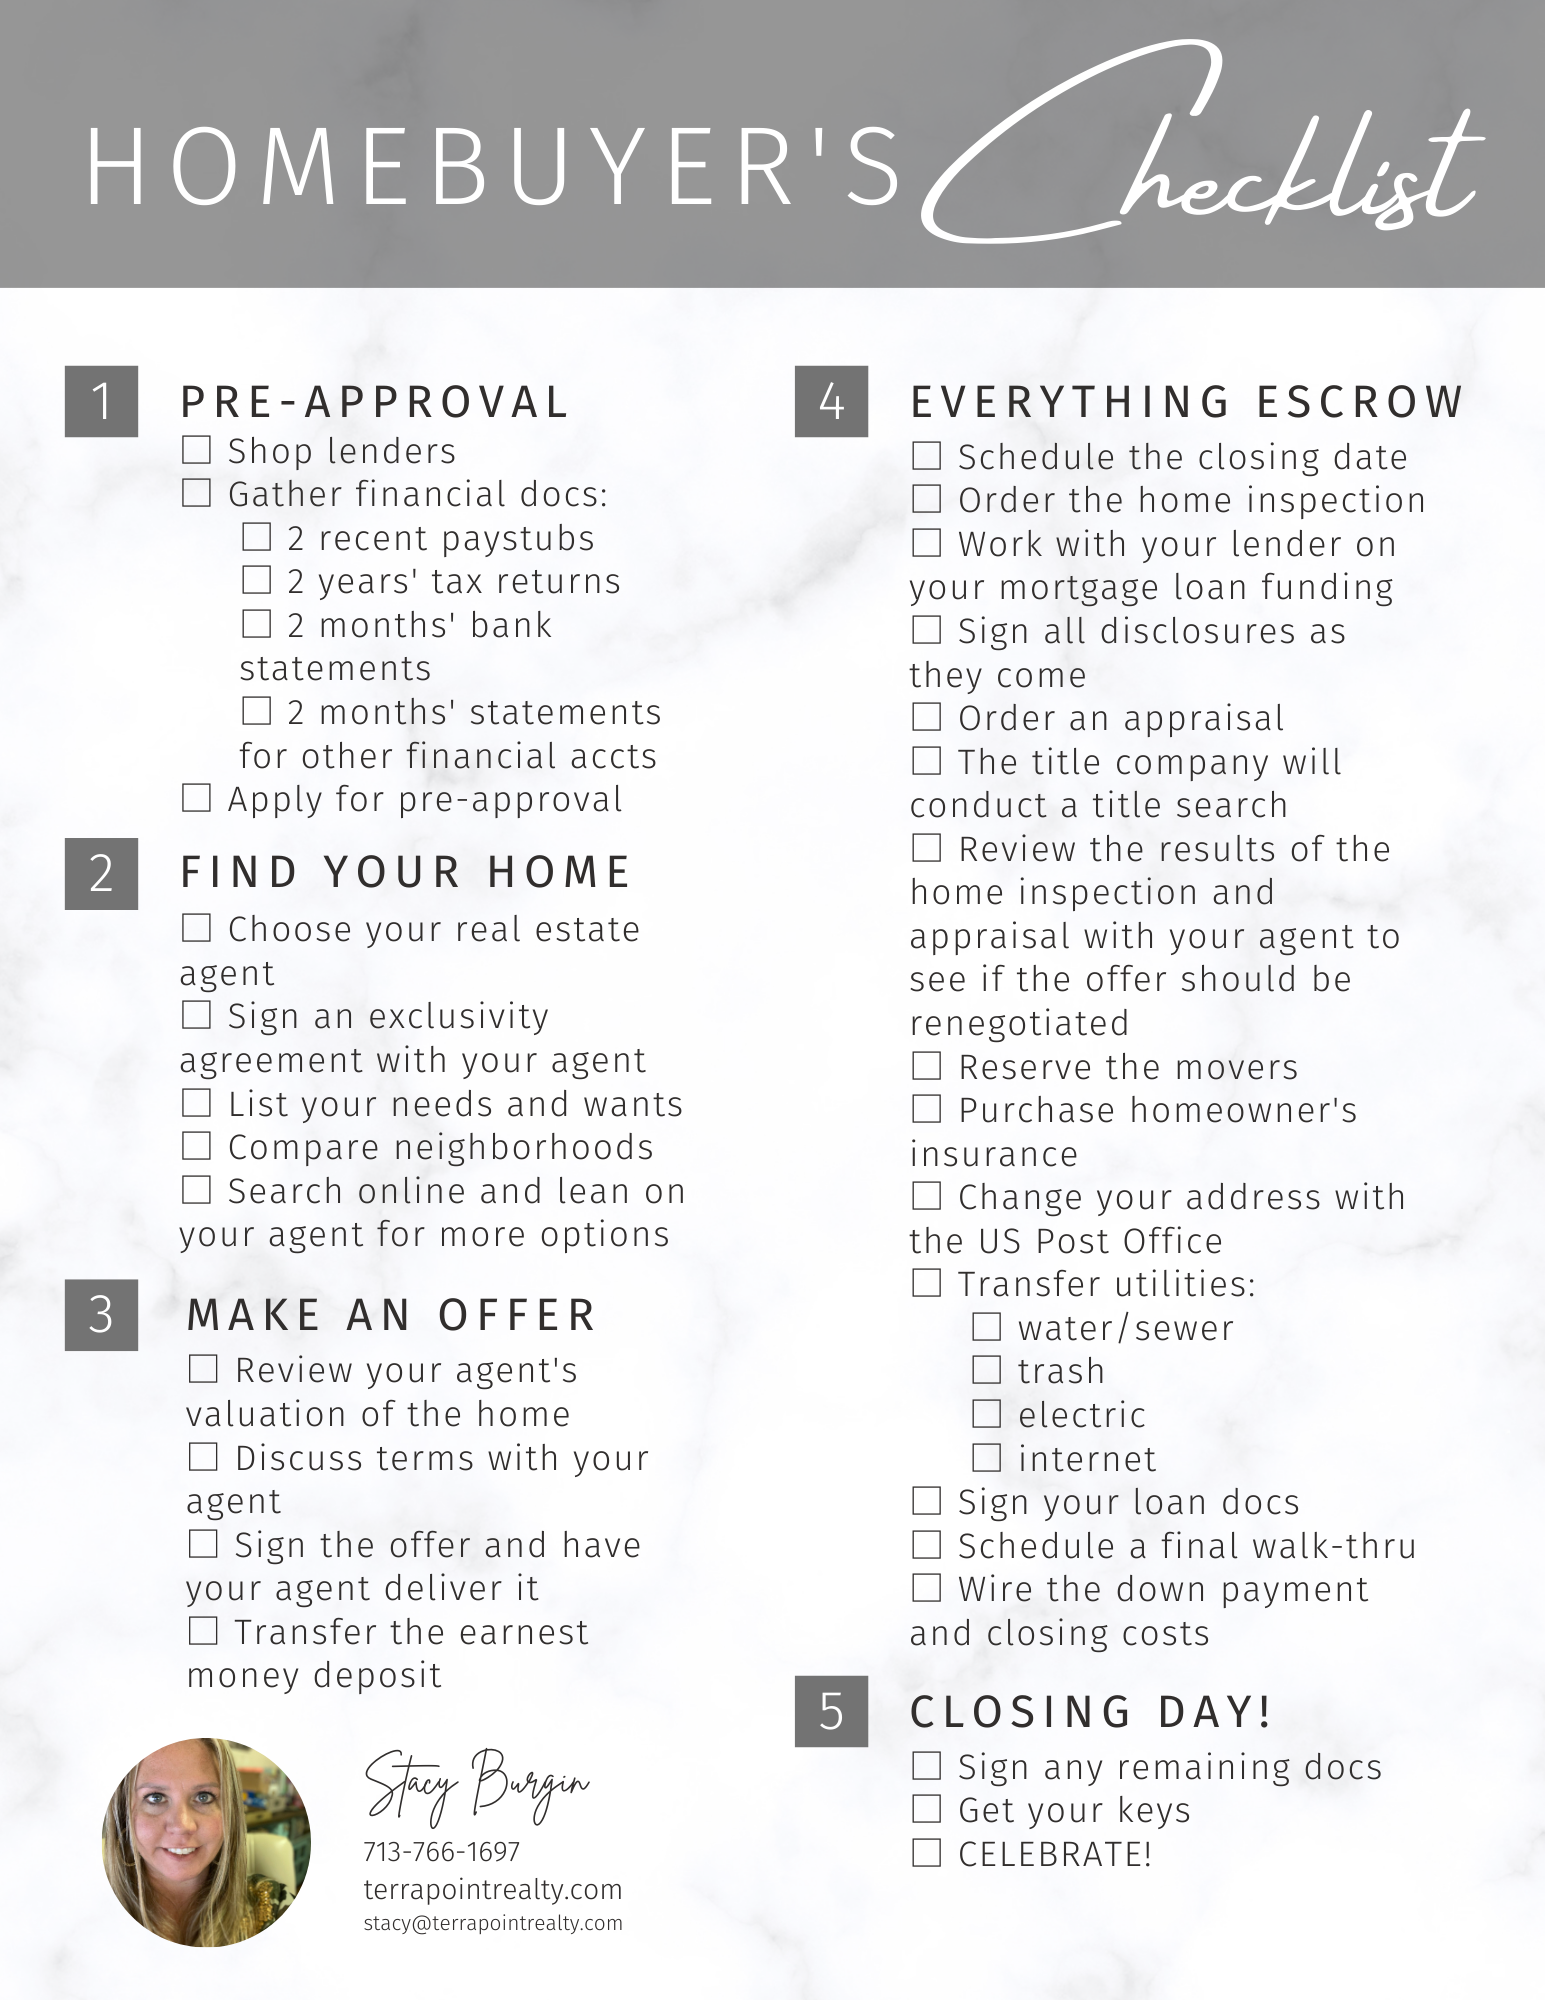 Home Buyers Checklist available for download